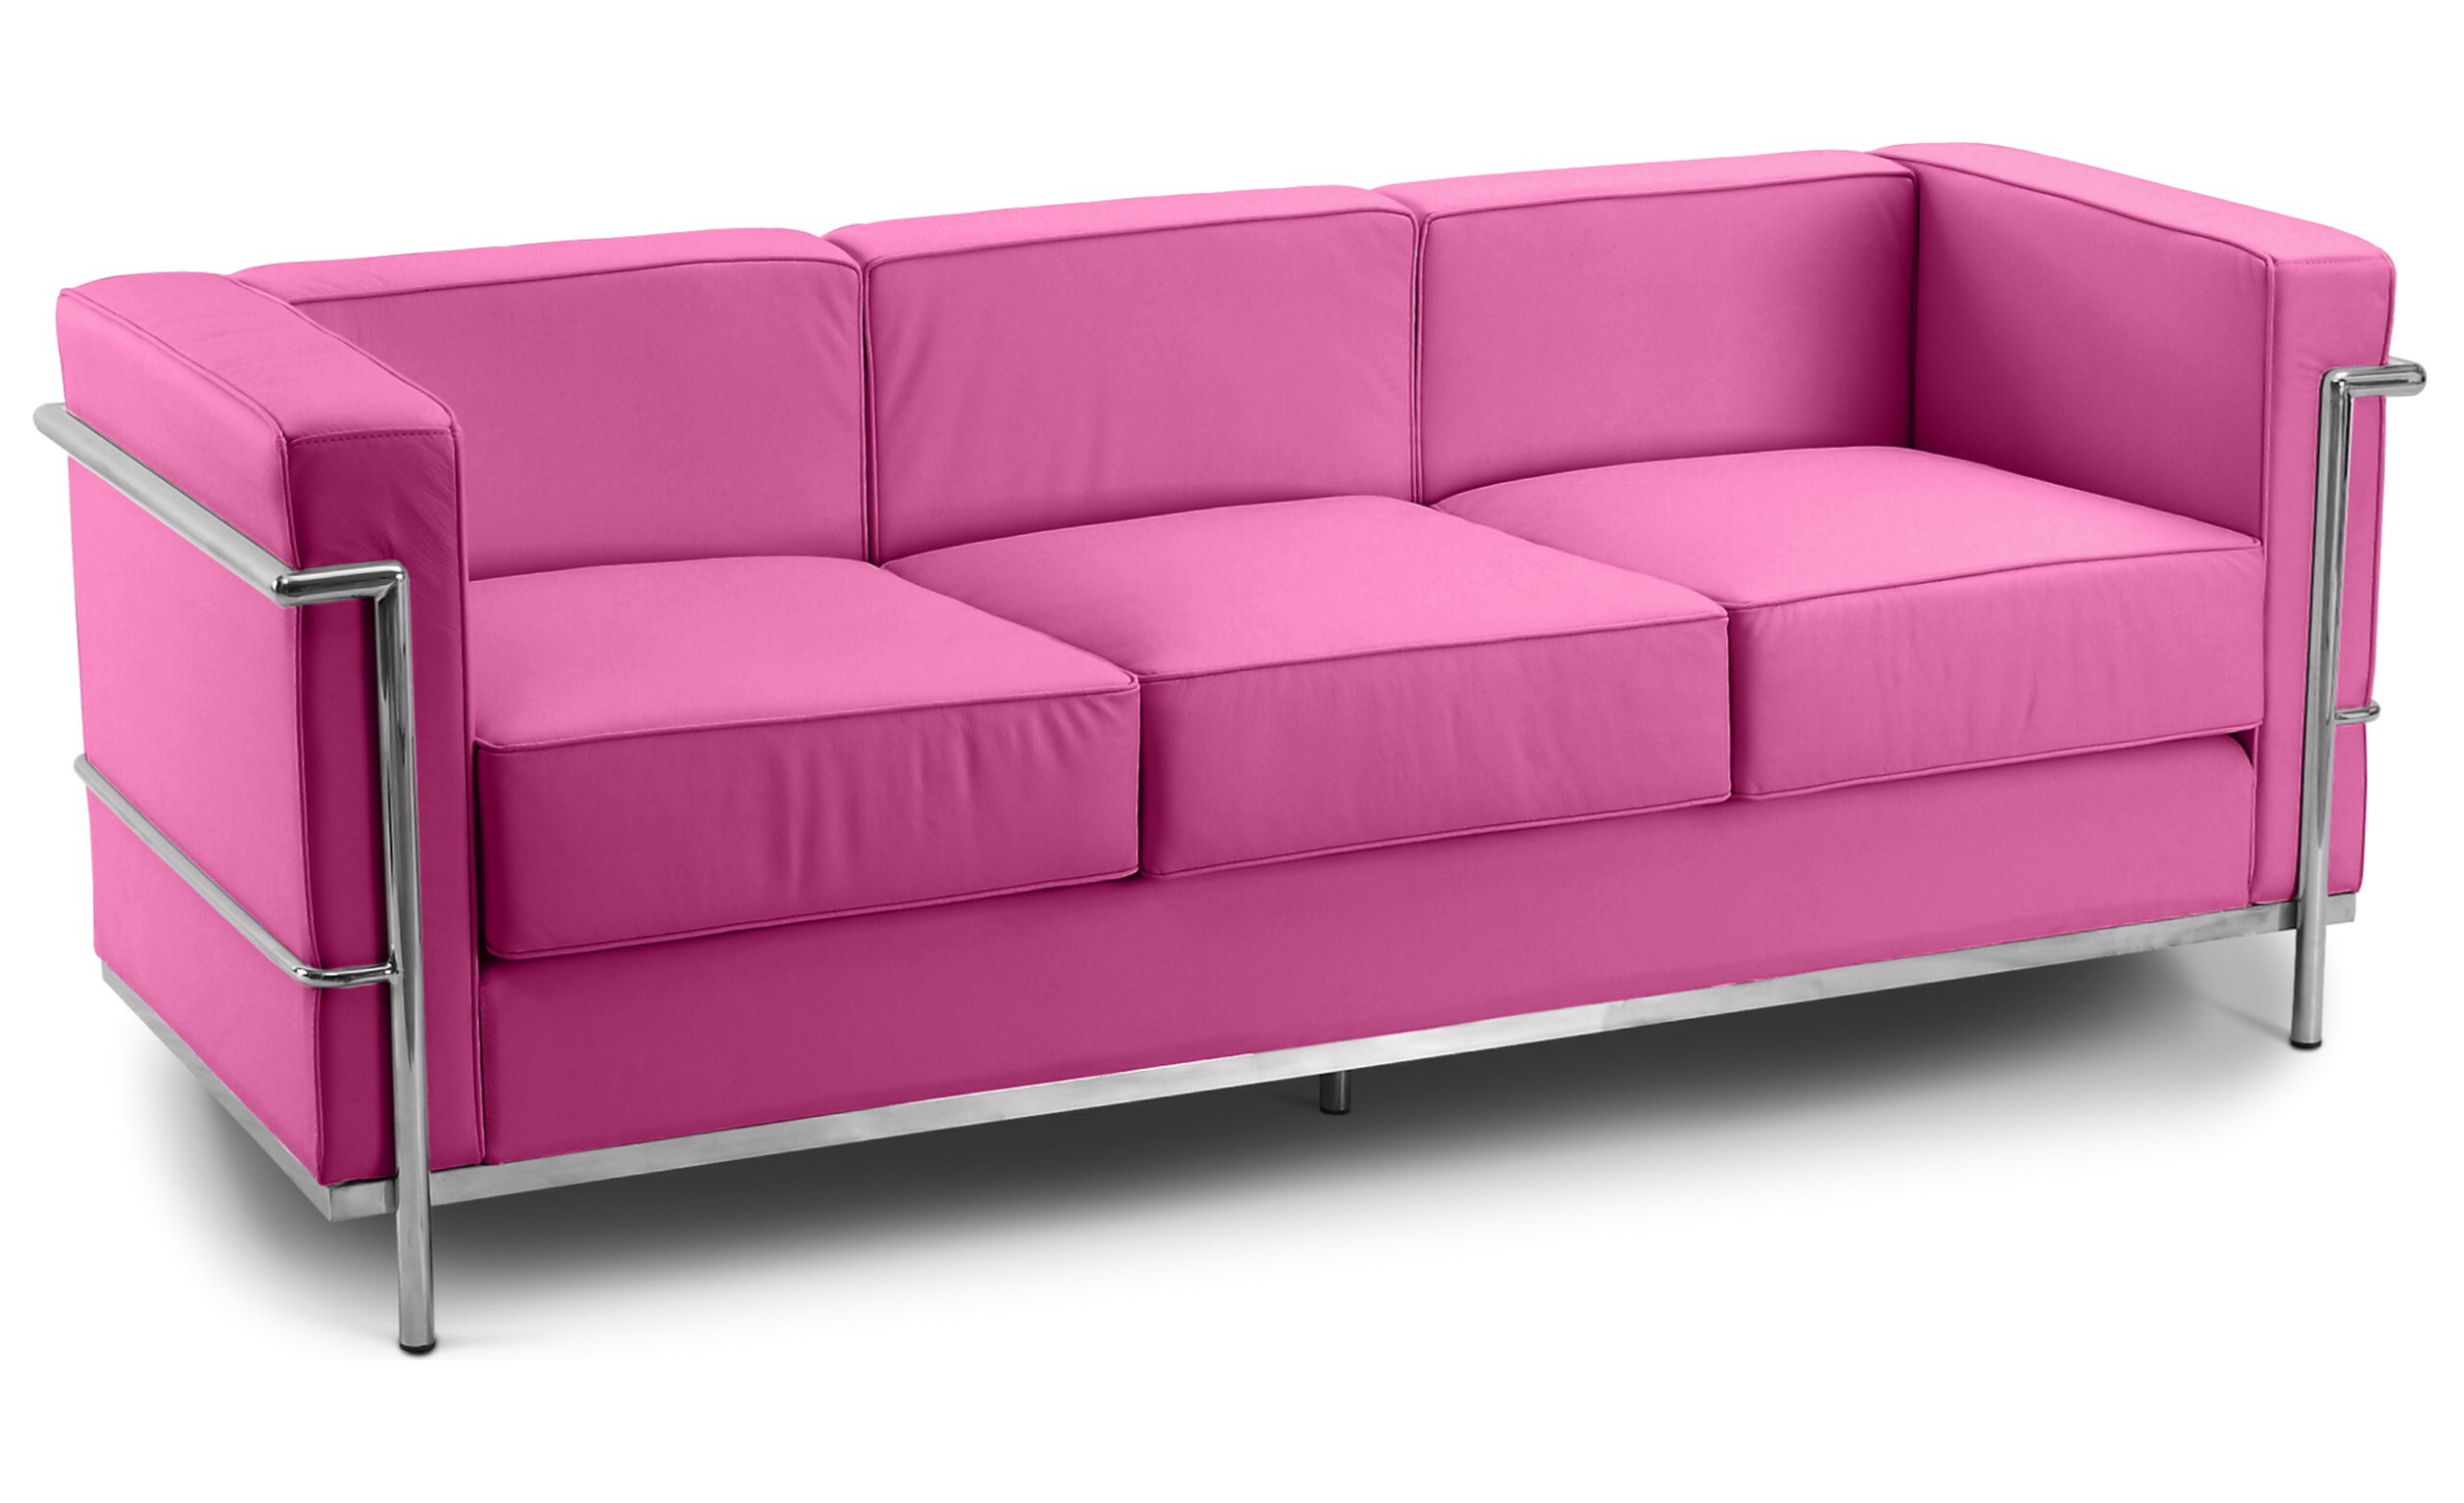 Corbusier 3 seater sofa faux leather pink 1960 wide